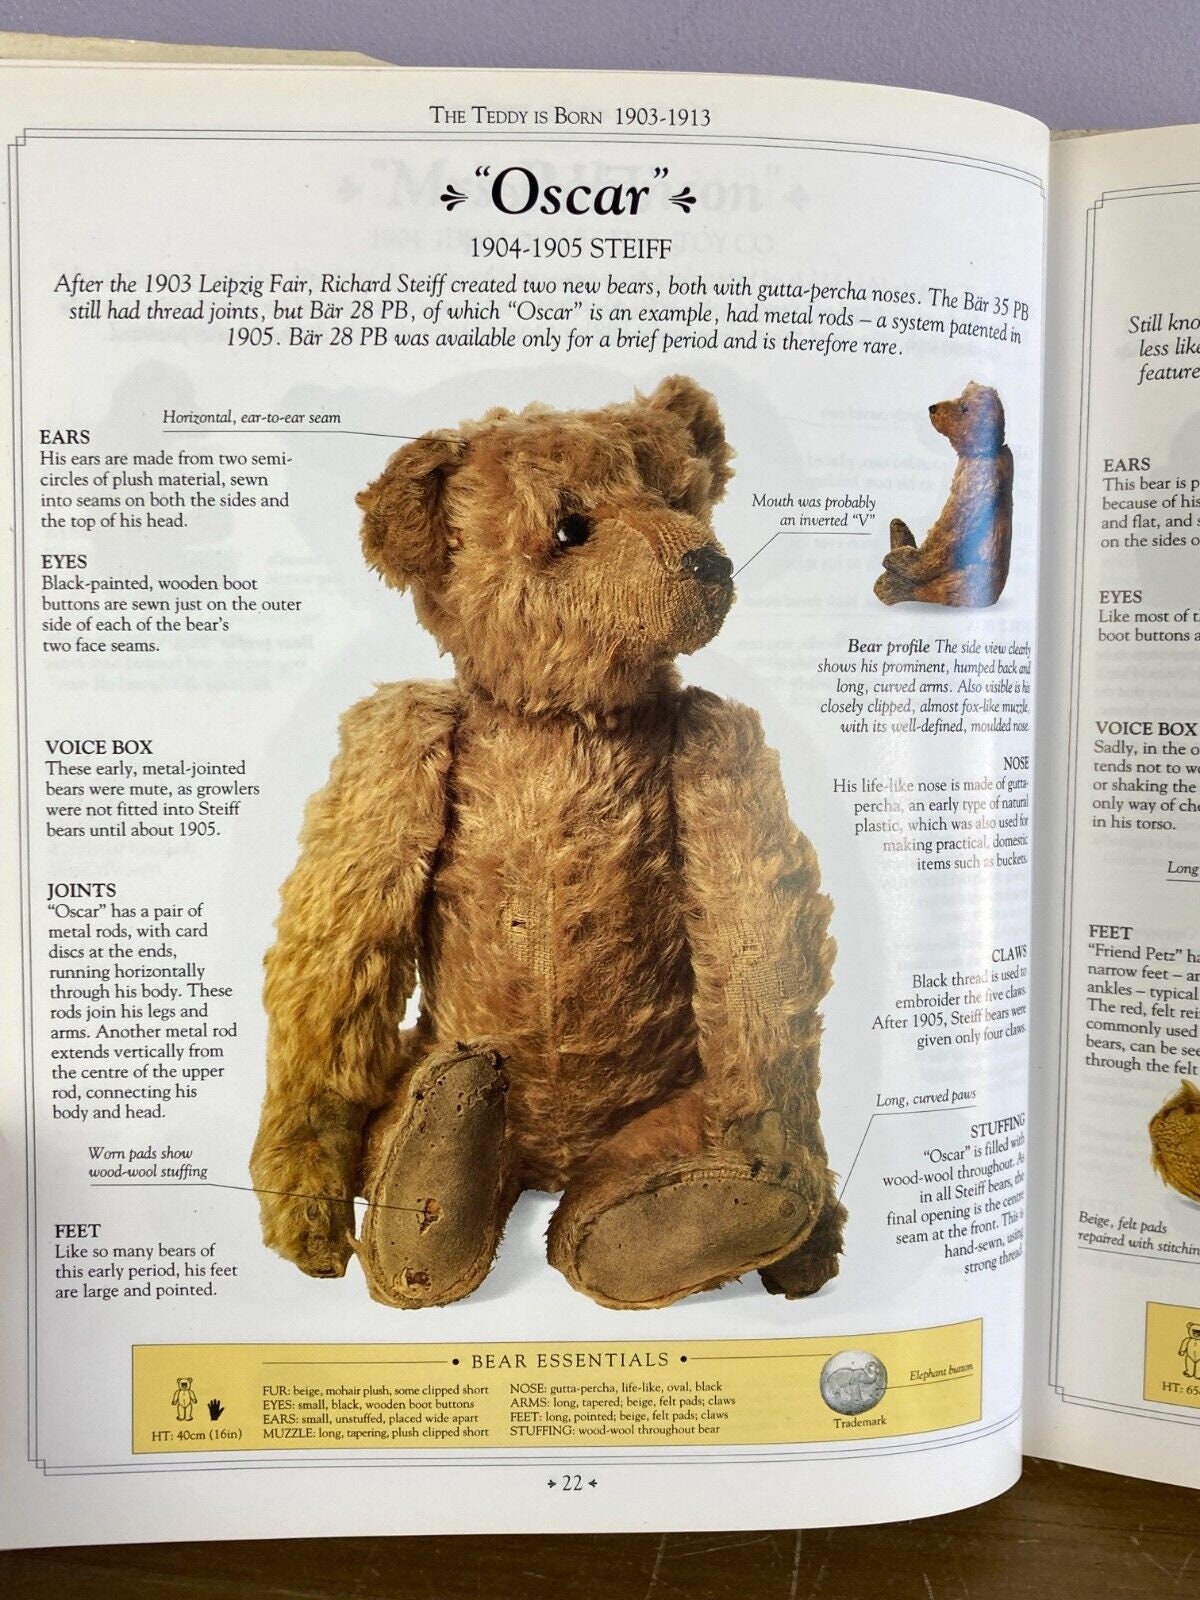 The Story of the Steiff Teddy Bear: An Illustrated History from 1902 [Book]